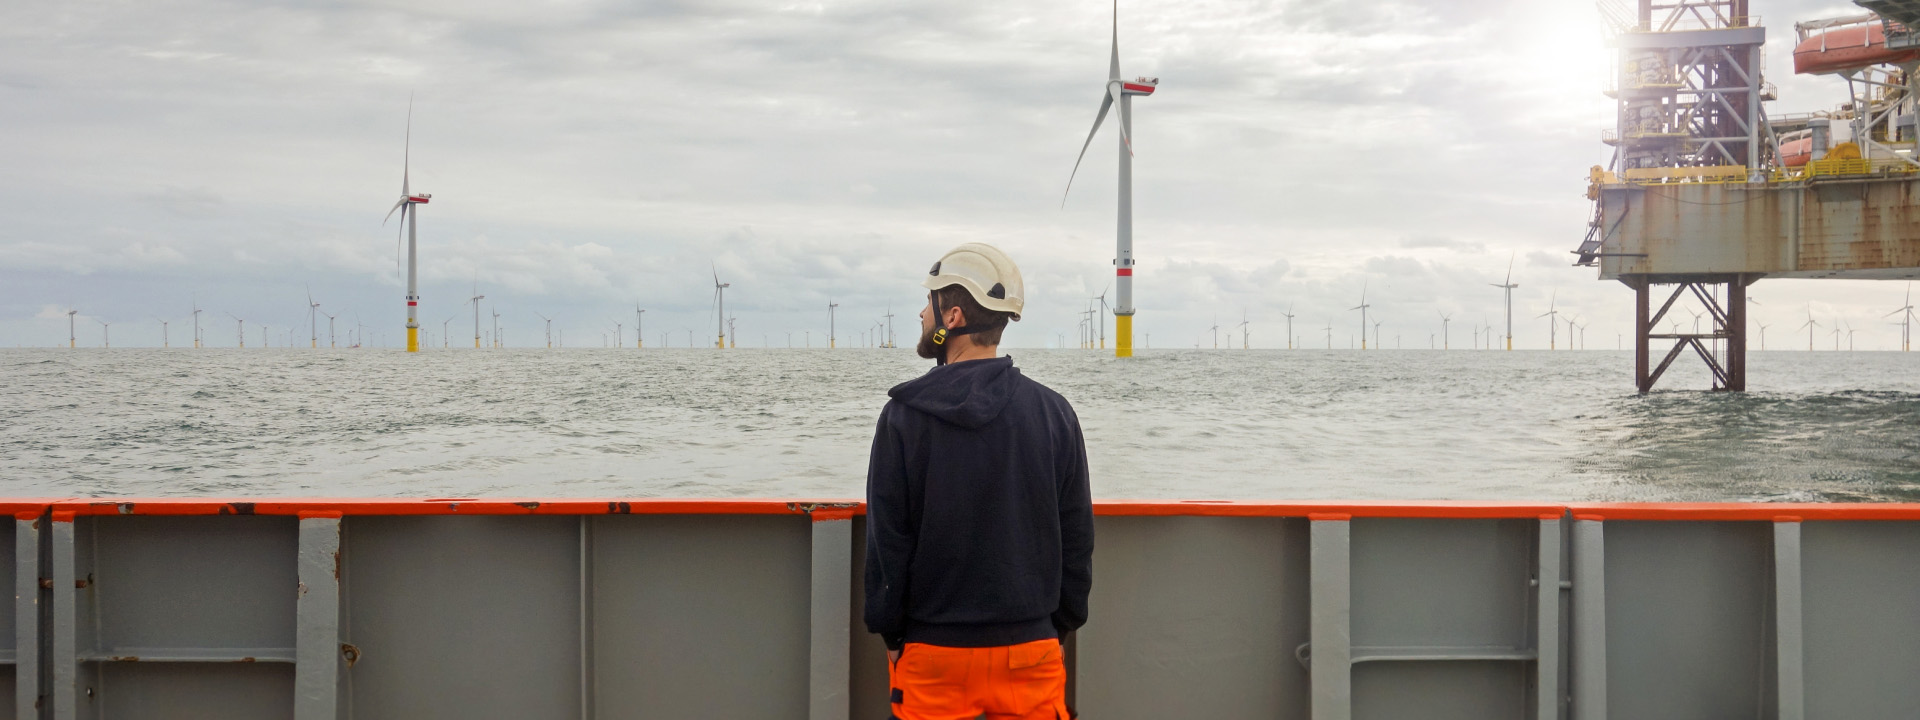 Man with hard hat looking out towards a wind turbine